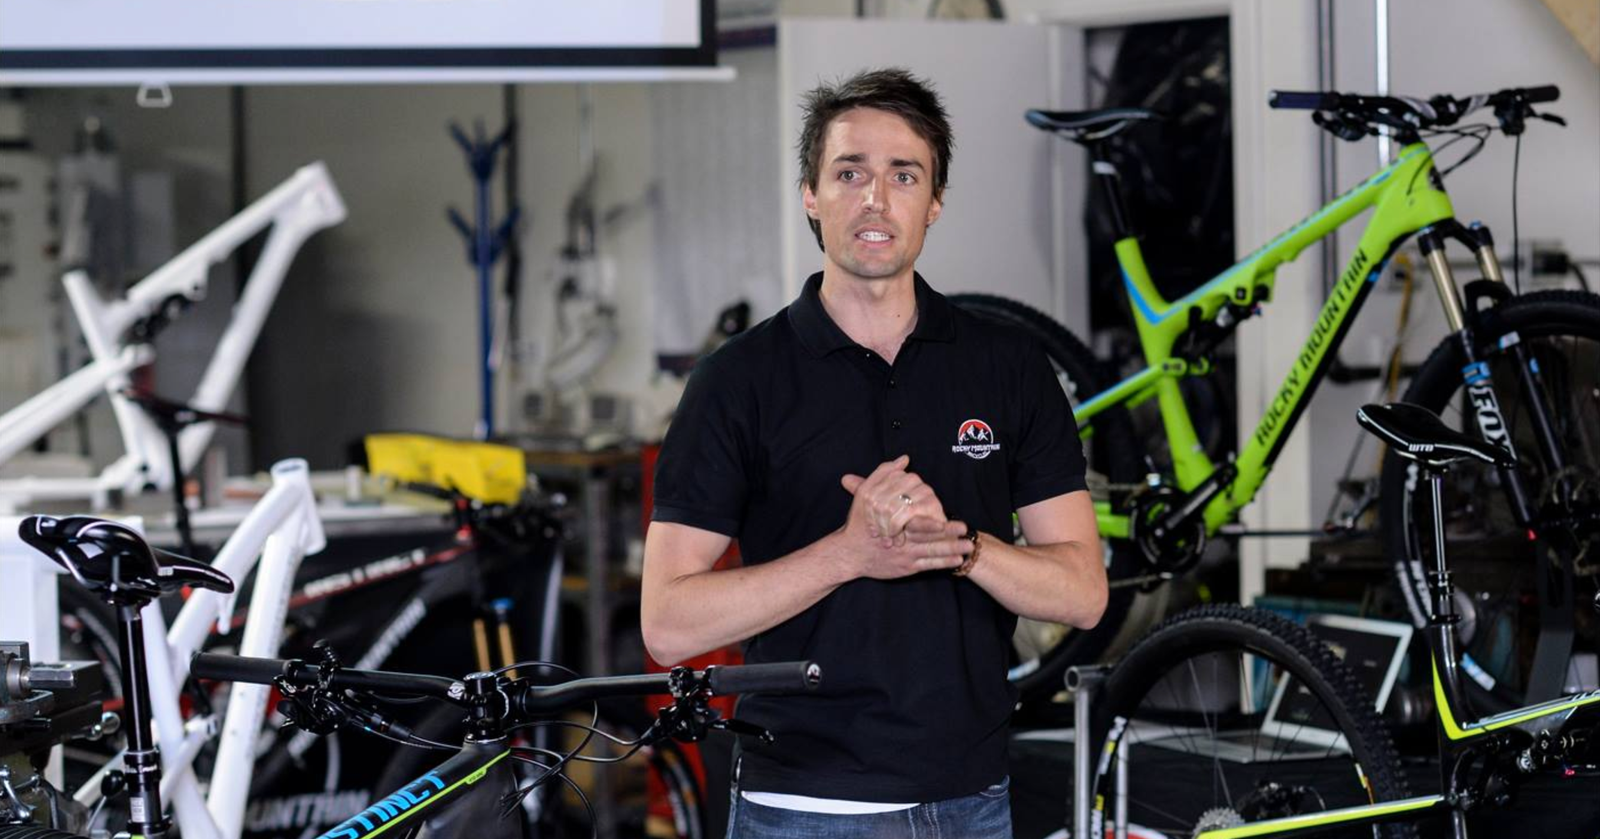 Global Marketing Manager Brandon Crichton launches new Rocky Mountain Bicycles